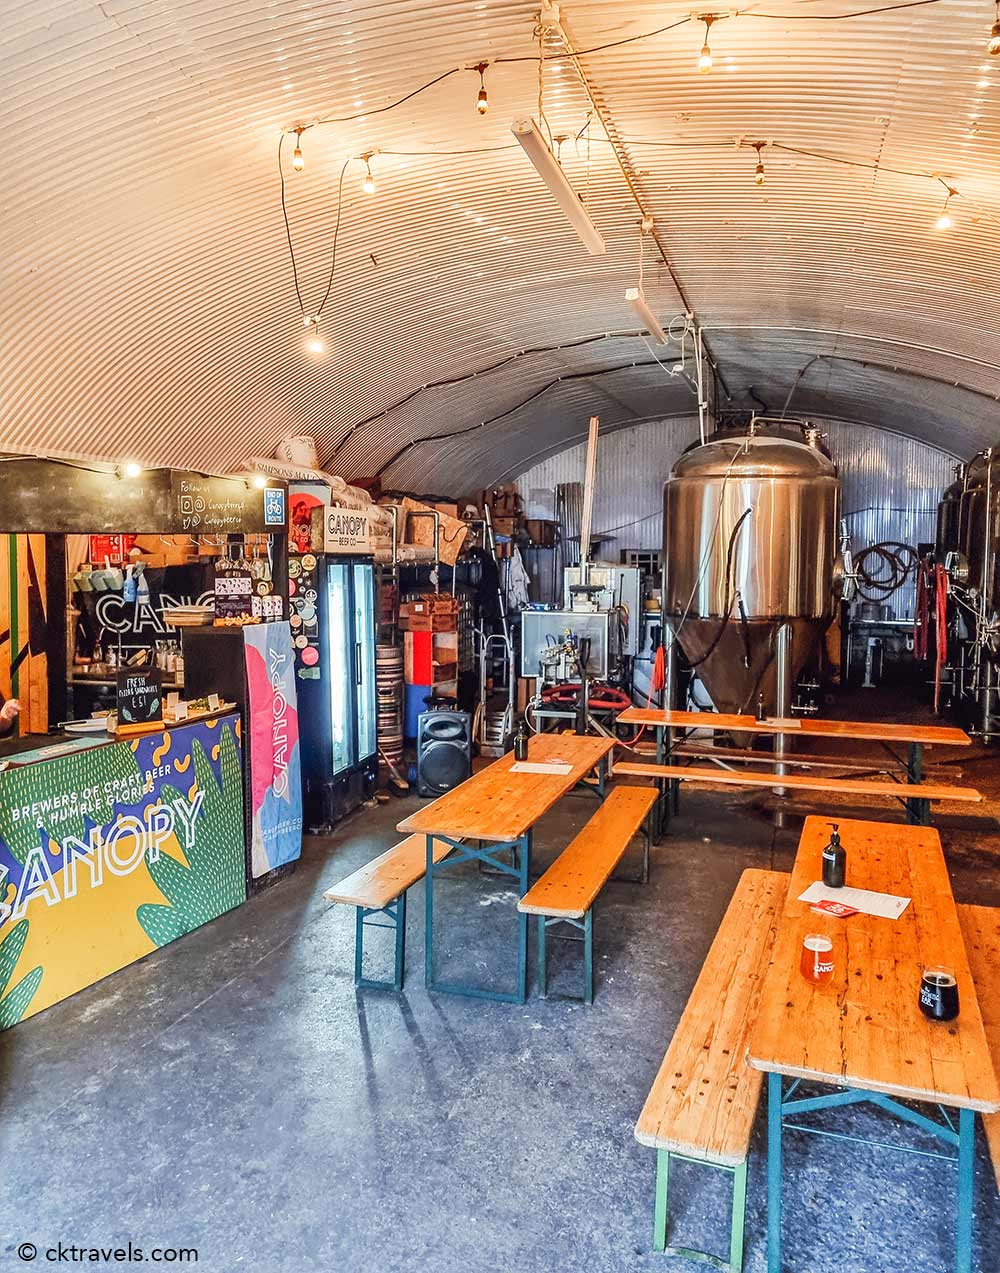 Canopy Beer Co brewery taproom, Herne Hill, south London